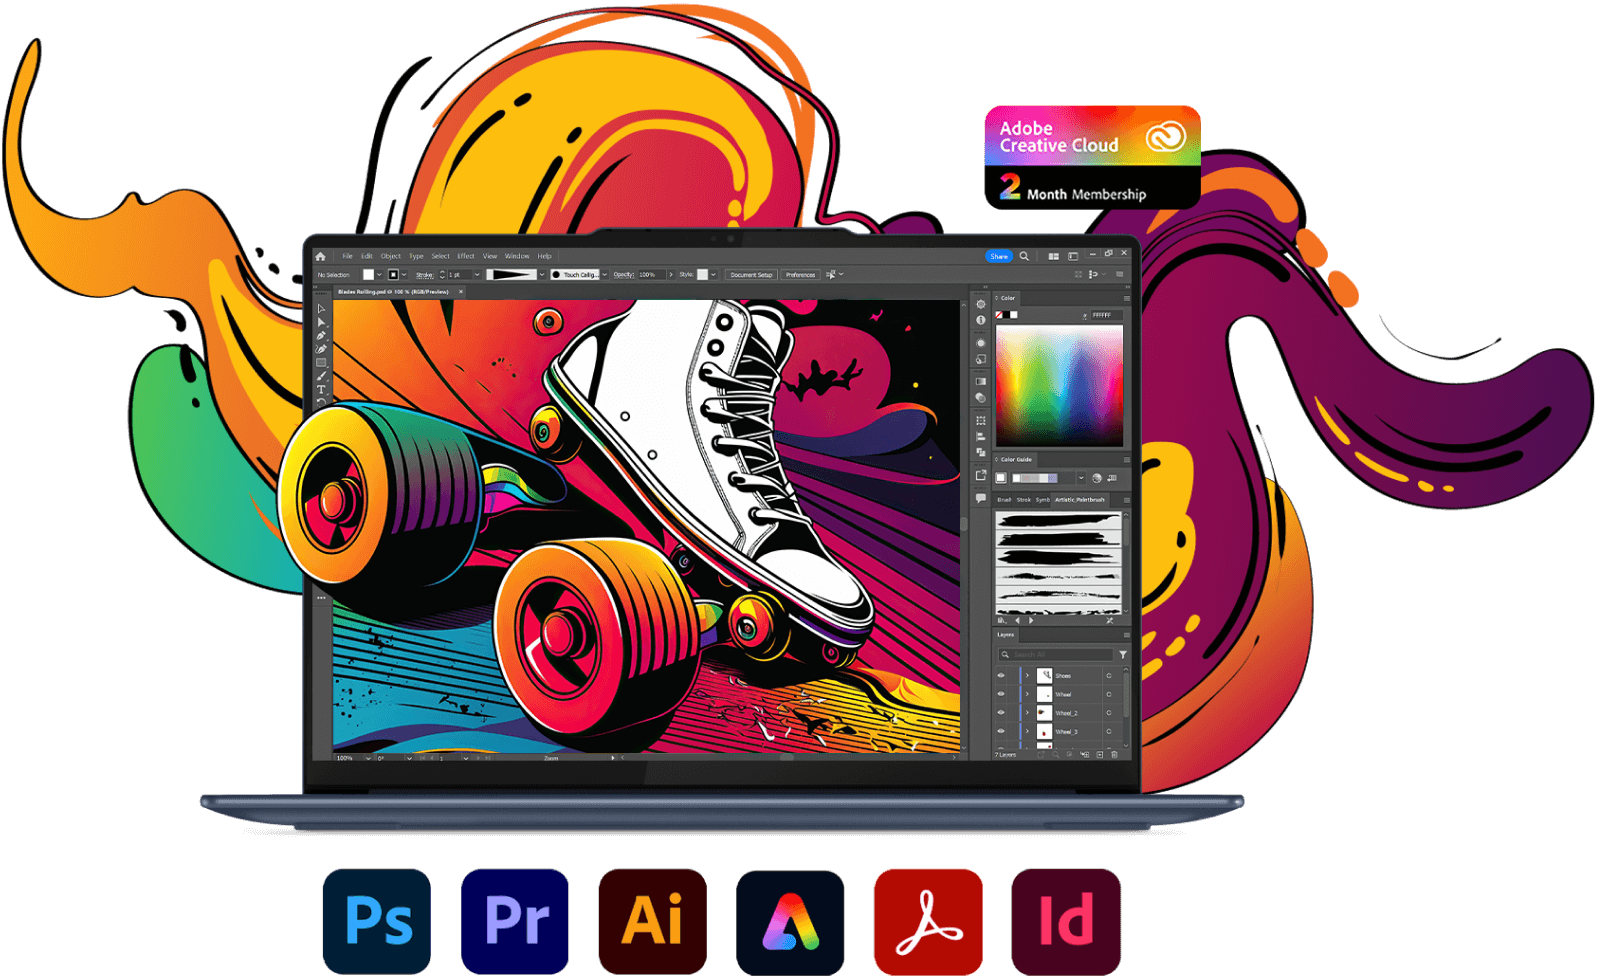 Lenovo Yoga laptop front facing with Photoshop on the screen, along with various Adobe Creative Cloud app icons.